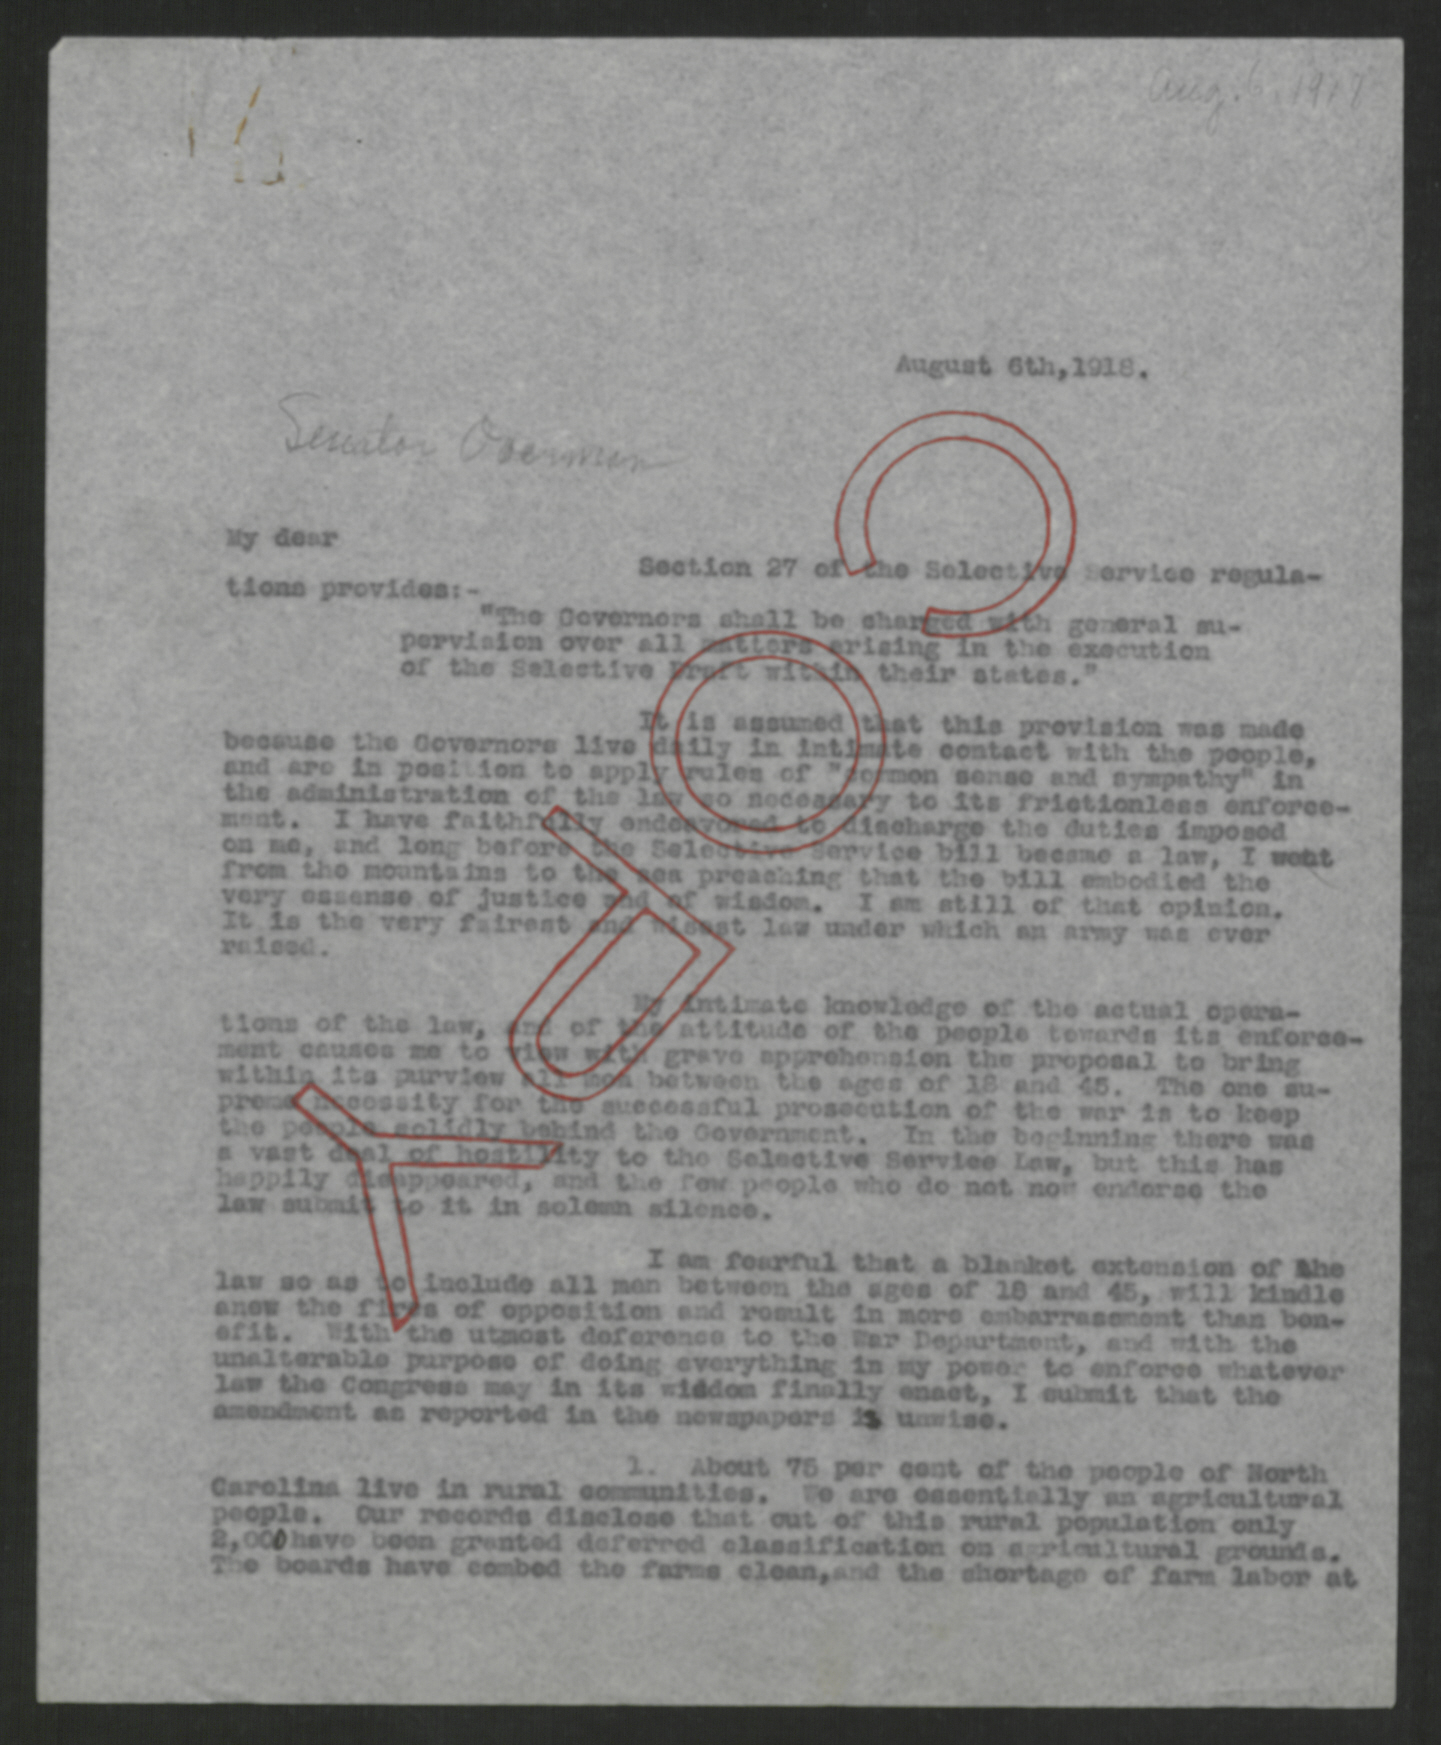 Letter from Thomas W. Bickett to Lee S. Overman, August 6, 1918, page 1